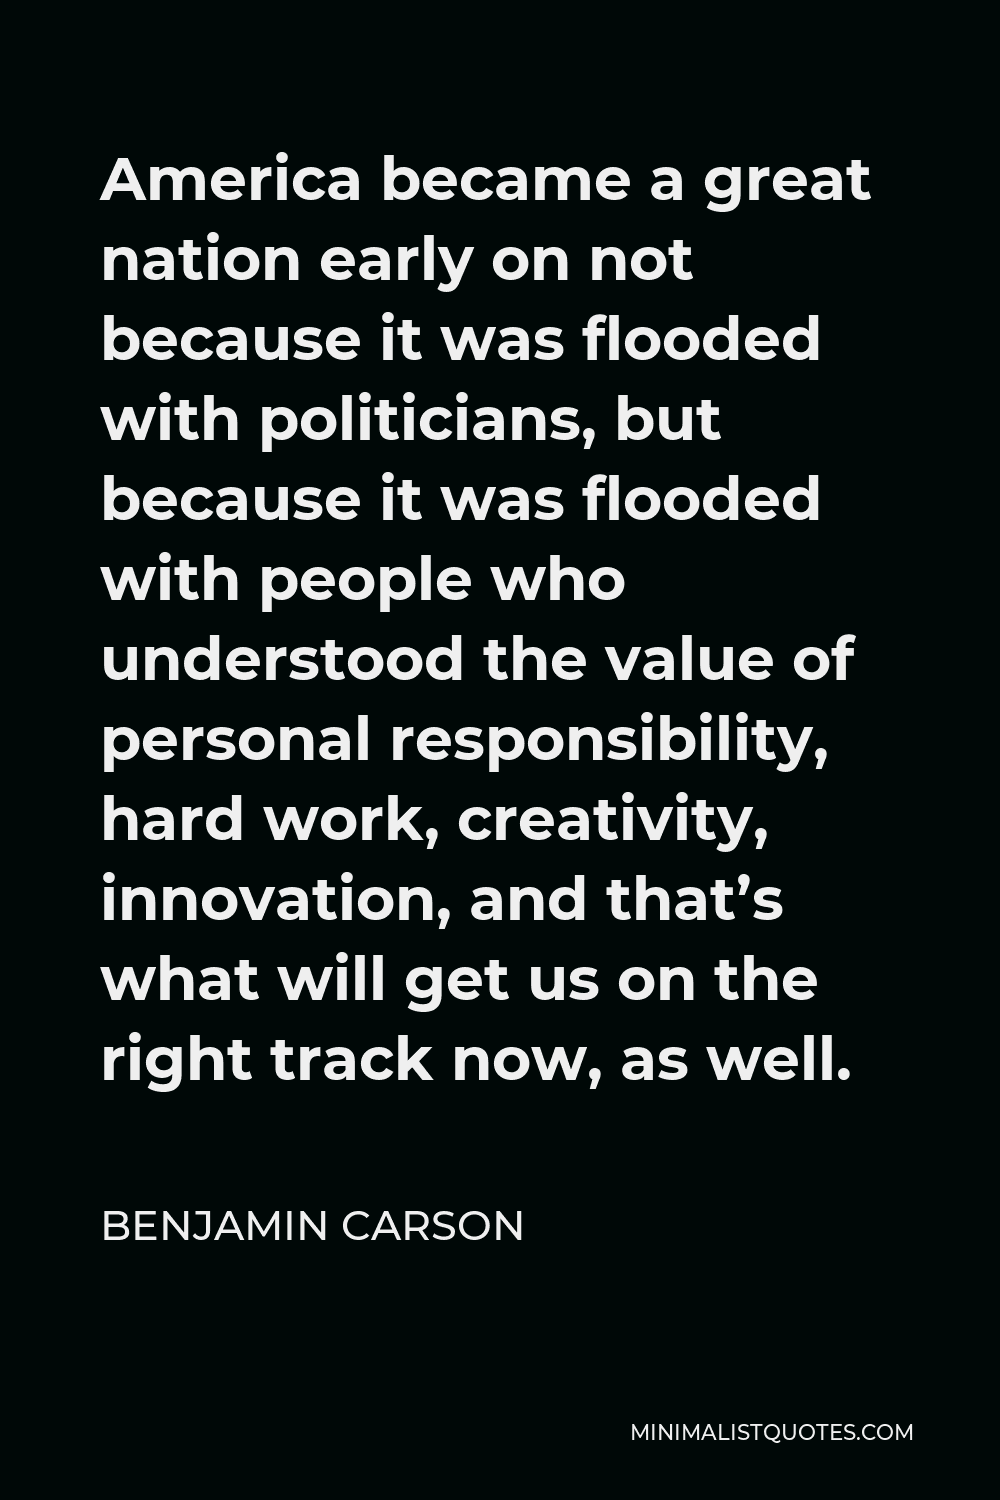 Benjamin Carson Quote - America became a great nation early on not because it was flooded with politicians, but because it was flooded with people who understood the value of personal responsibility, hard work, creativity, innovation, and that’s what will get us on the right track now, as well.